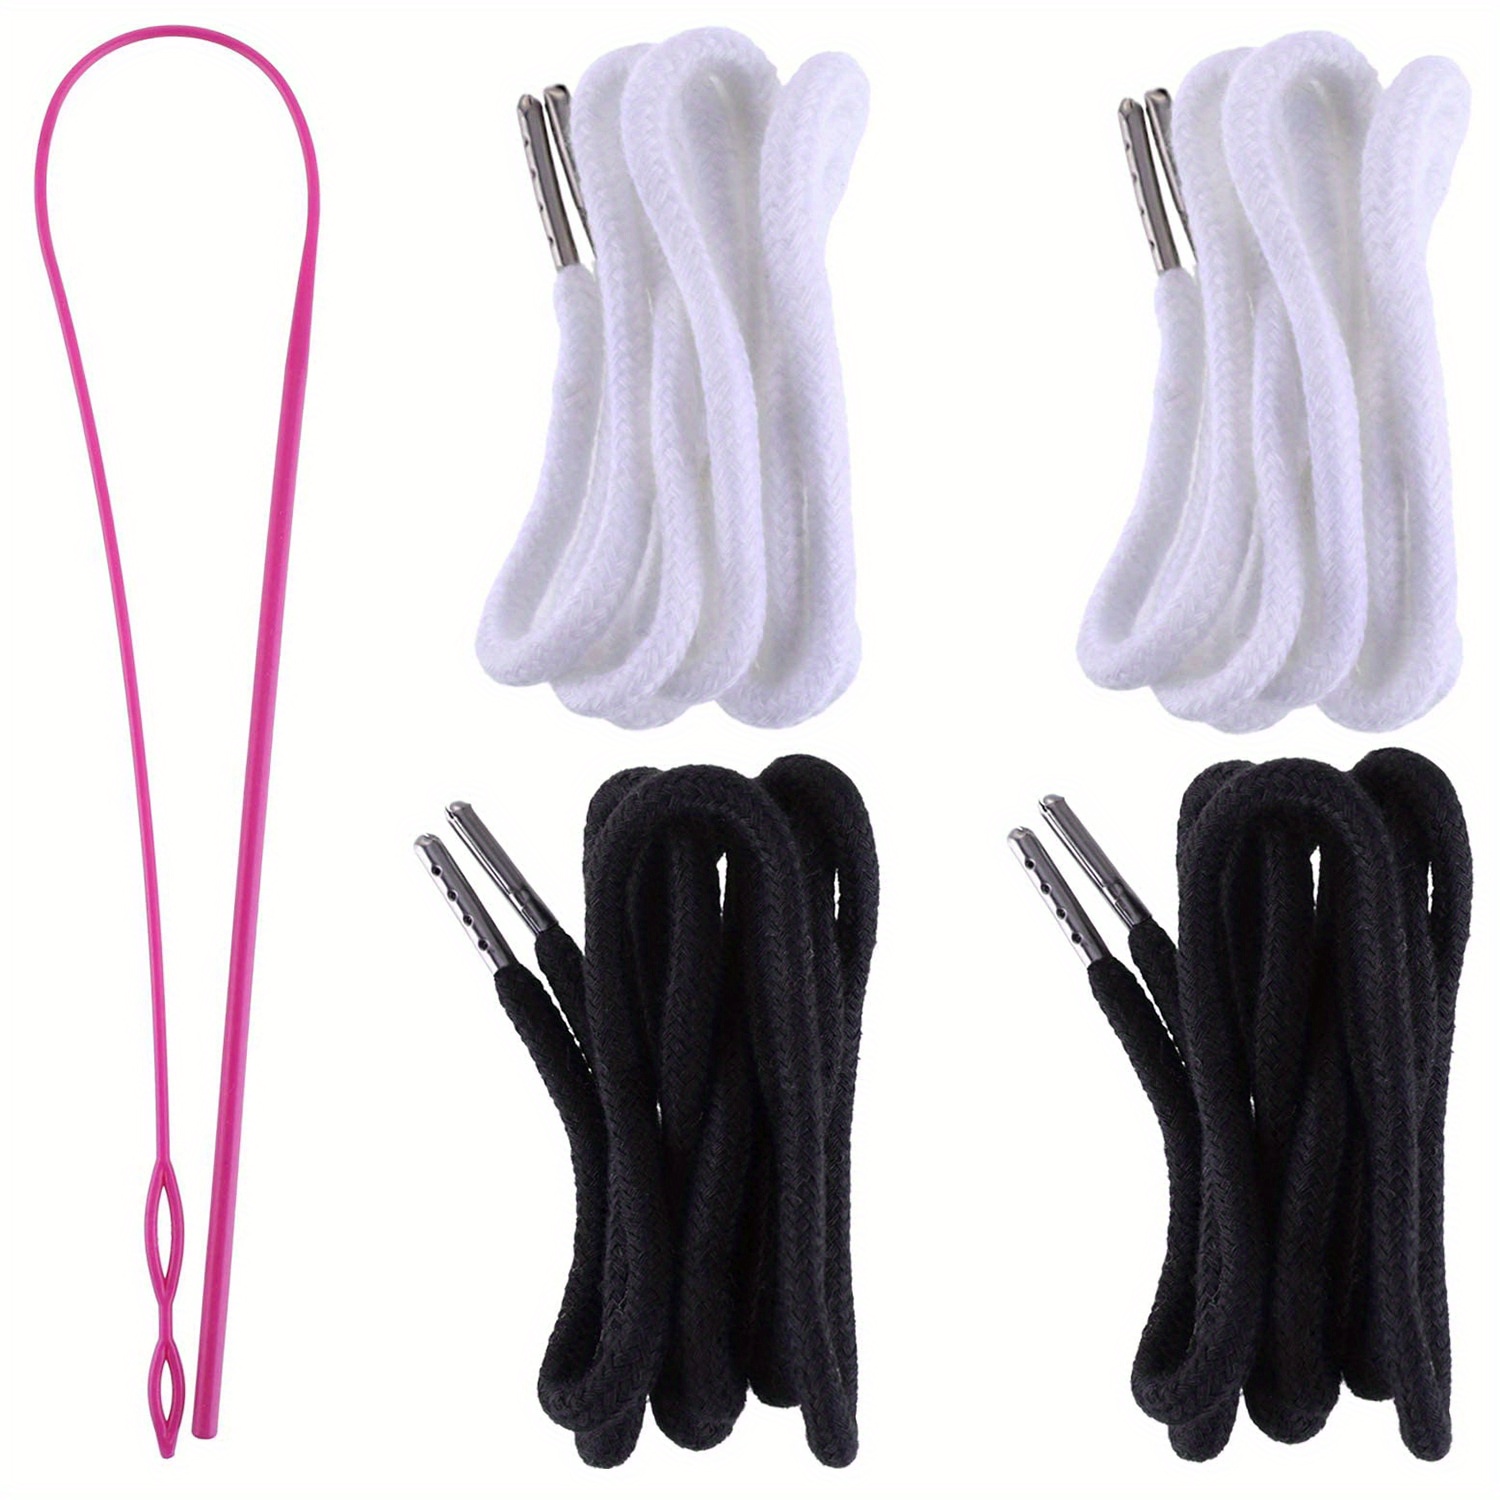 30 Pcs 66 Inches XL Lengthened Drawstring Replacement Drawstring Cords  Hoodie String Replacement Clothing Drawstring with 3 Pcs Flexible Easy  Threaders for Sweatpants Hoodies Pants Jackets Coats